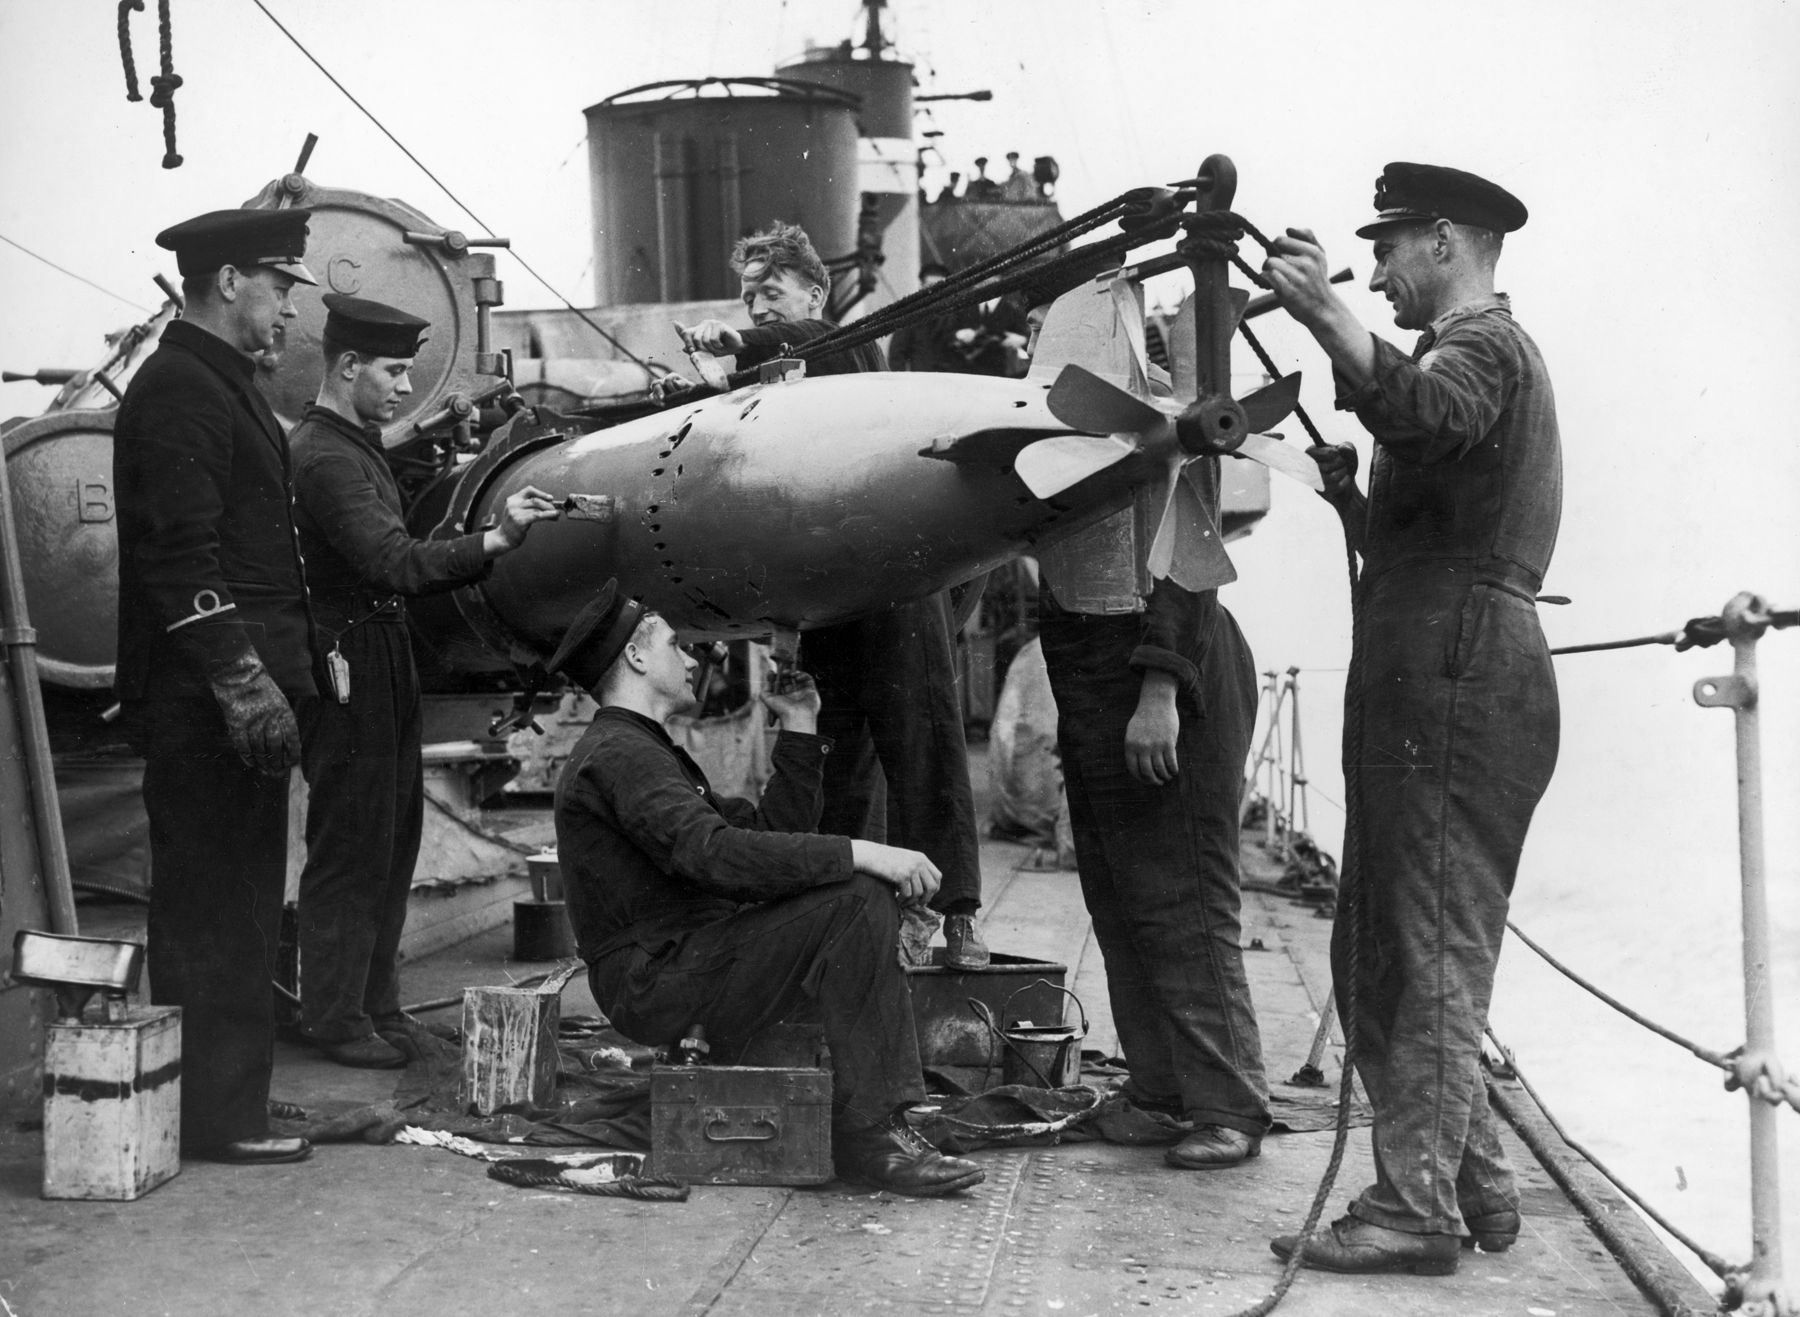 Seamen aboard a Royal Navy destroyer prep a torpedo for a launch against German U-boats, August 1941.